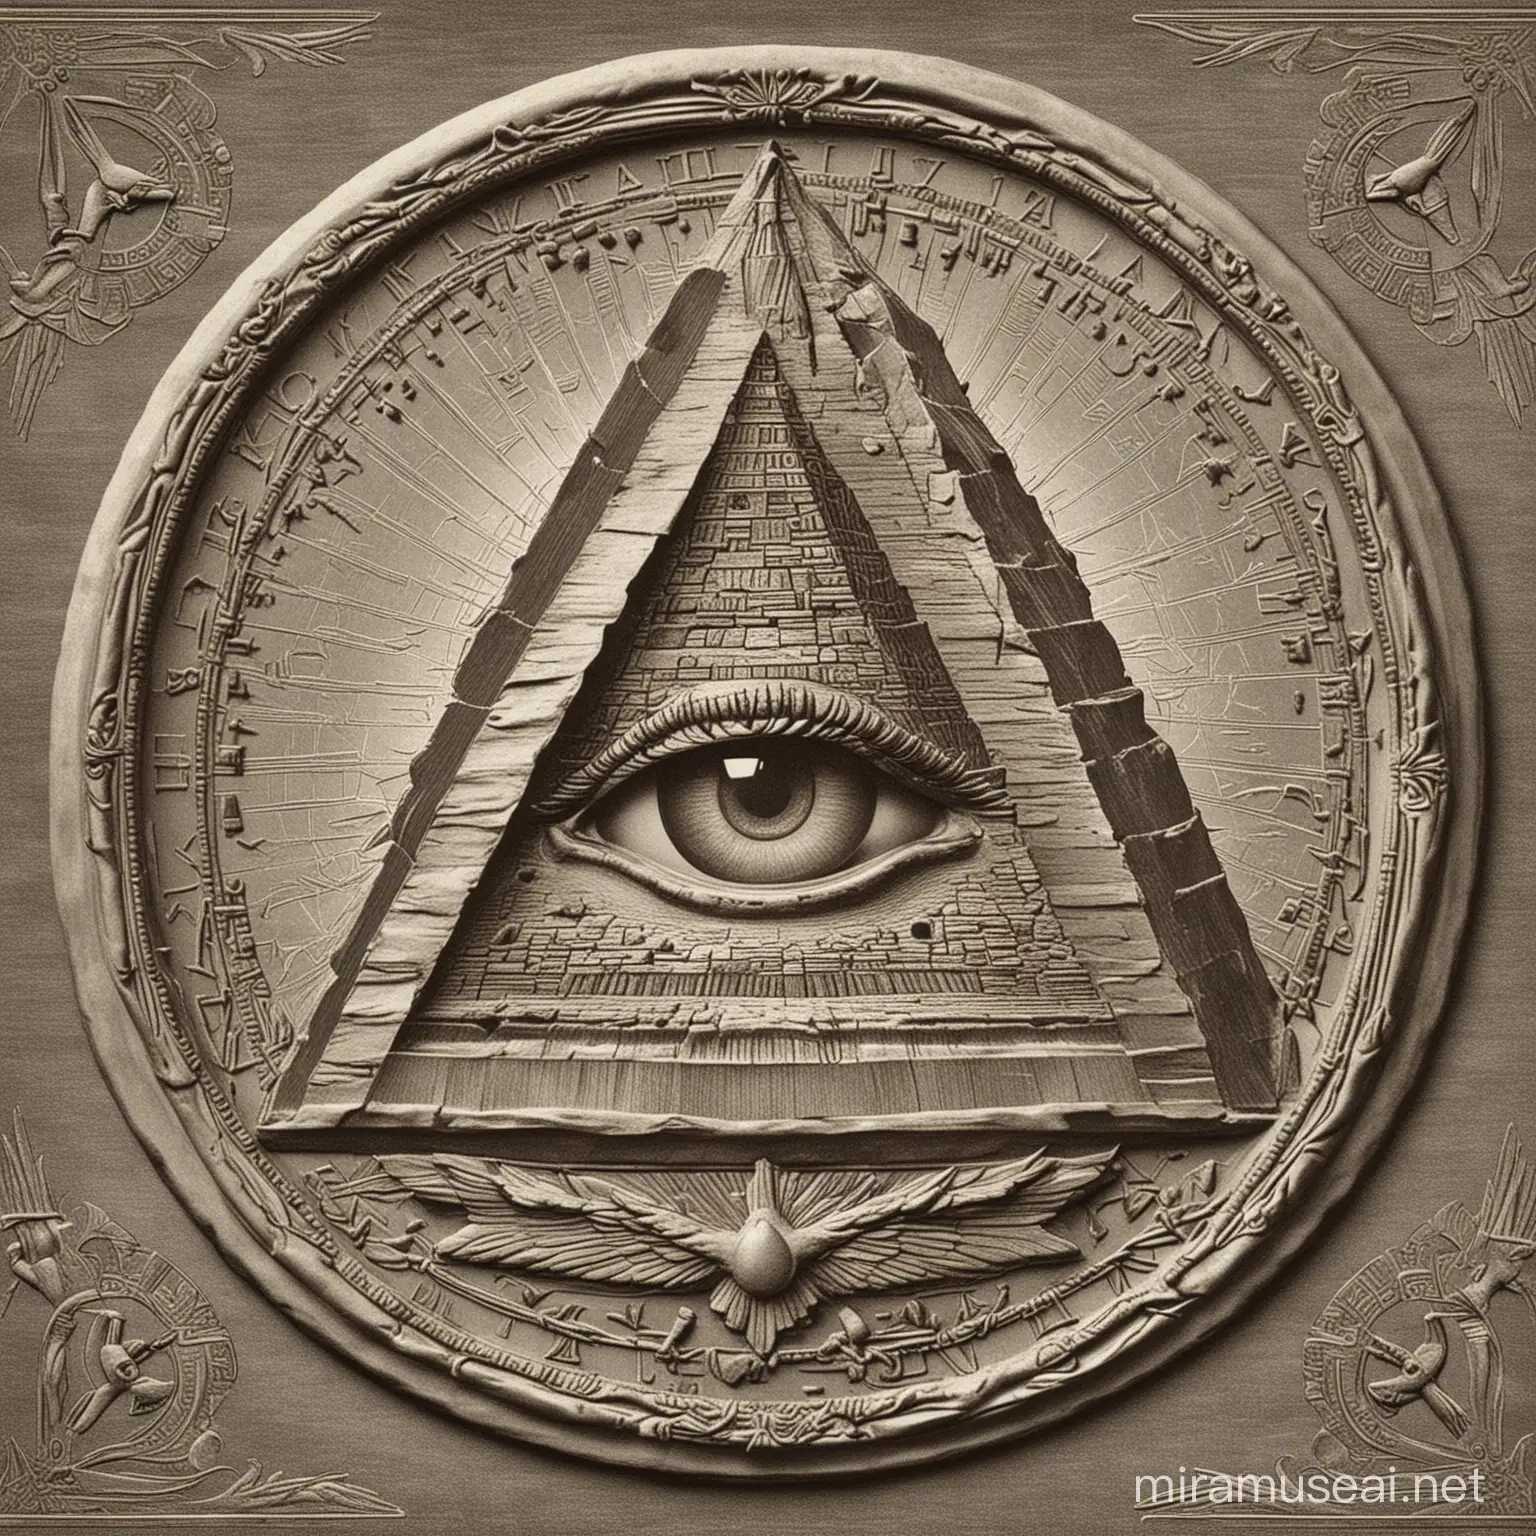 Create an intricate illustration showcasing the Great Seal of the United States with a focus on the pyramid and the Eye of Providence in a retro engraving style. No Text